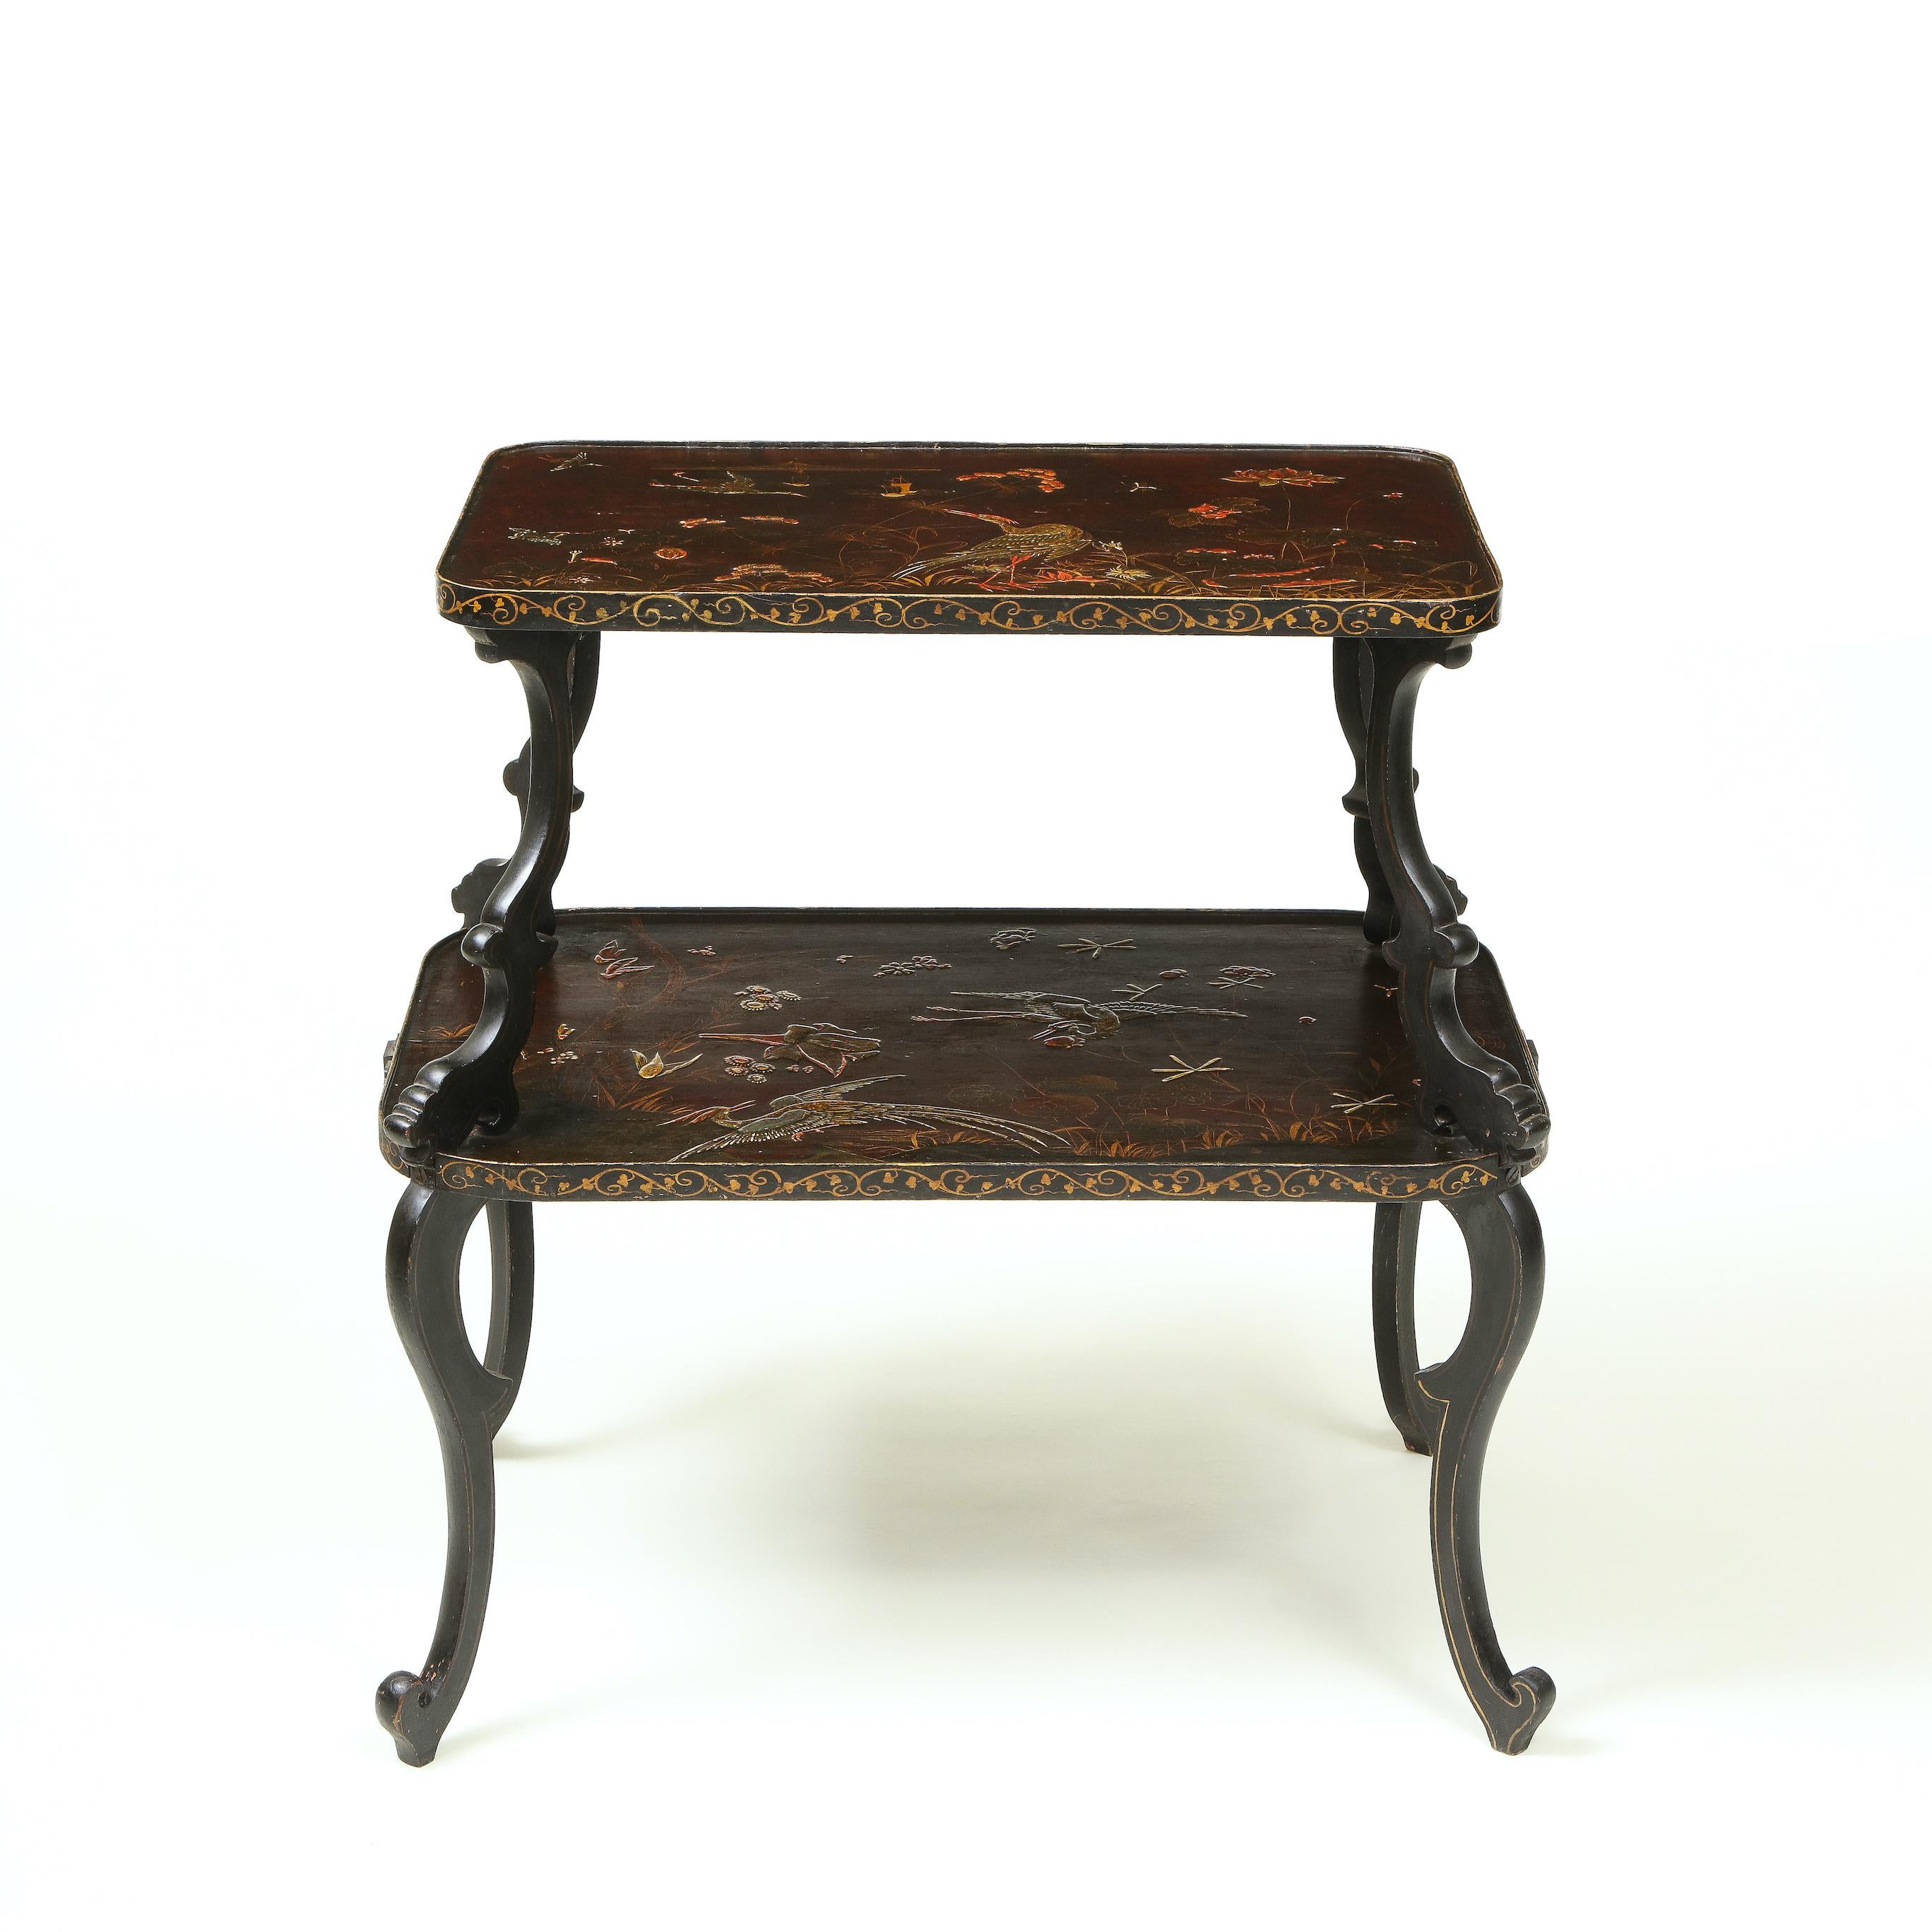 With two rectangular aubergine-ground graduated table tops each japanned with bird and floral decoration, with gilt vine garlands on the edges; on ebonized scroll-form supports.

Provenance: From the Collection of Mario Buatta, New York, NY